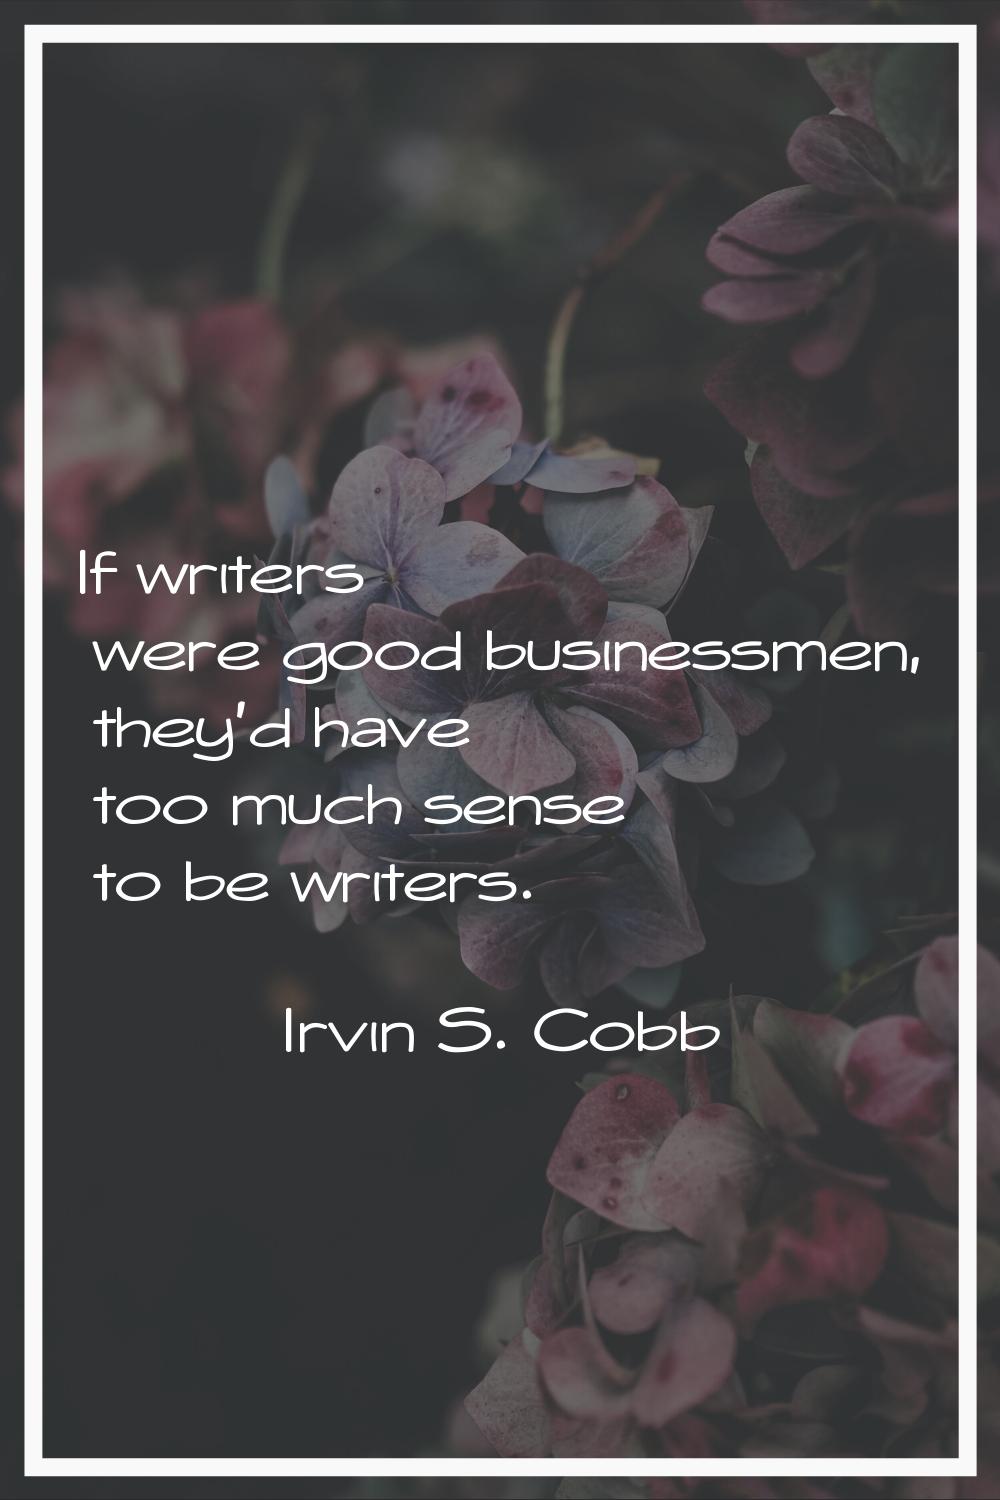 If writers were good businessmen, they'd have too much sense to be writers.